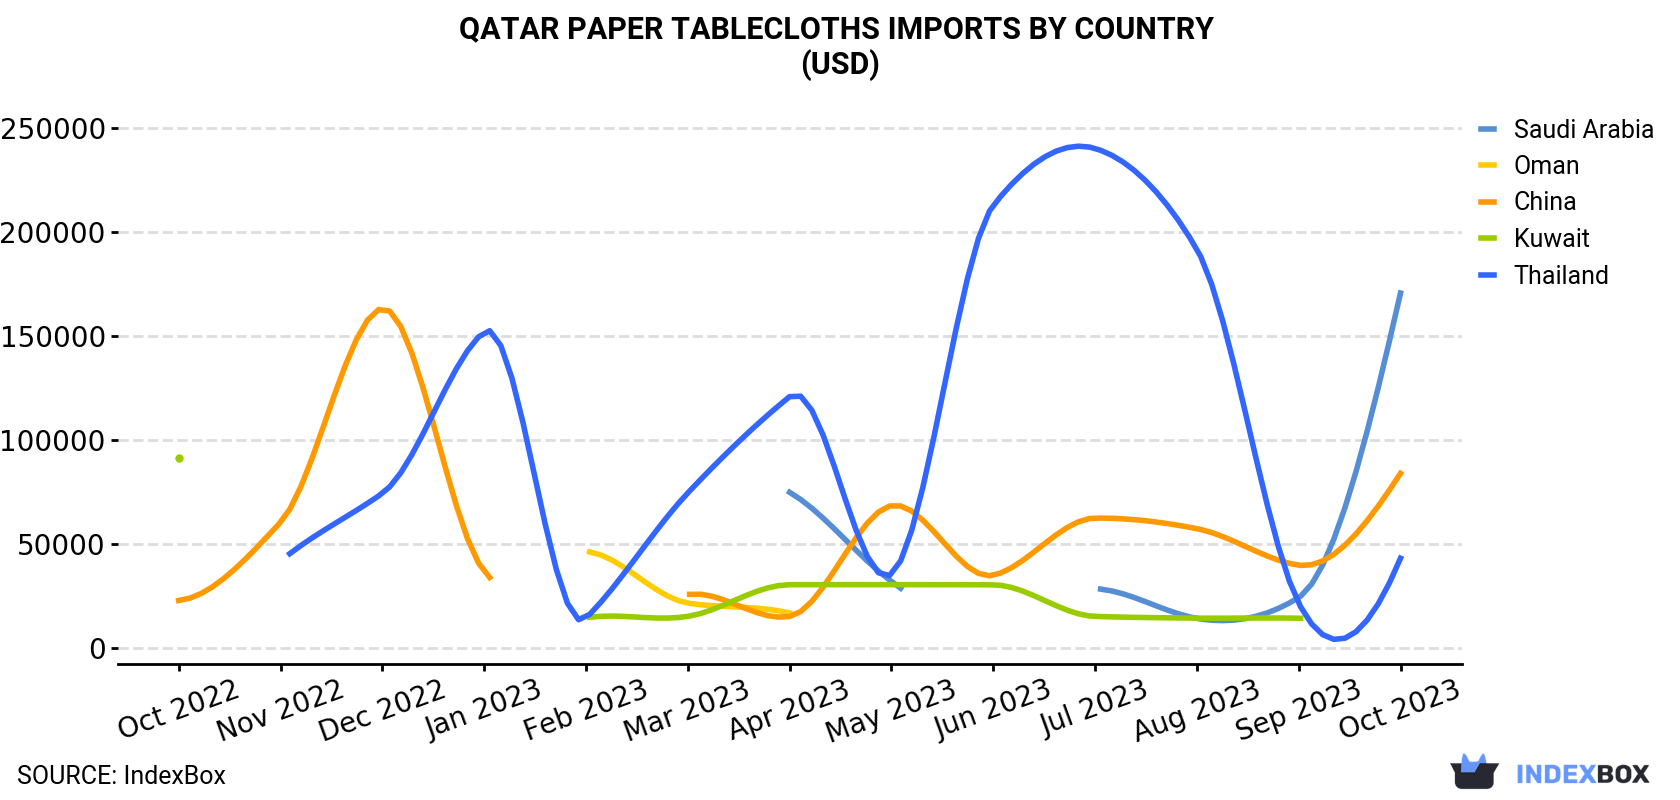 Qatar Paper Tablecloths Imports By Country (USD)